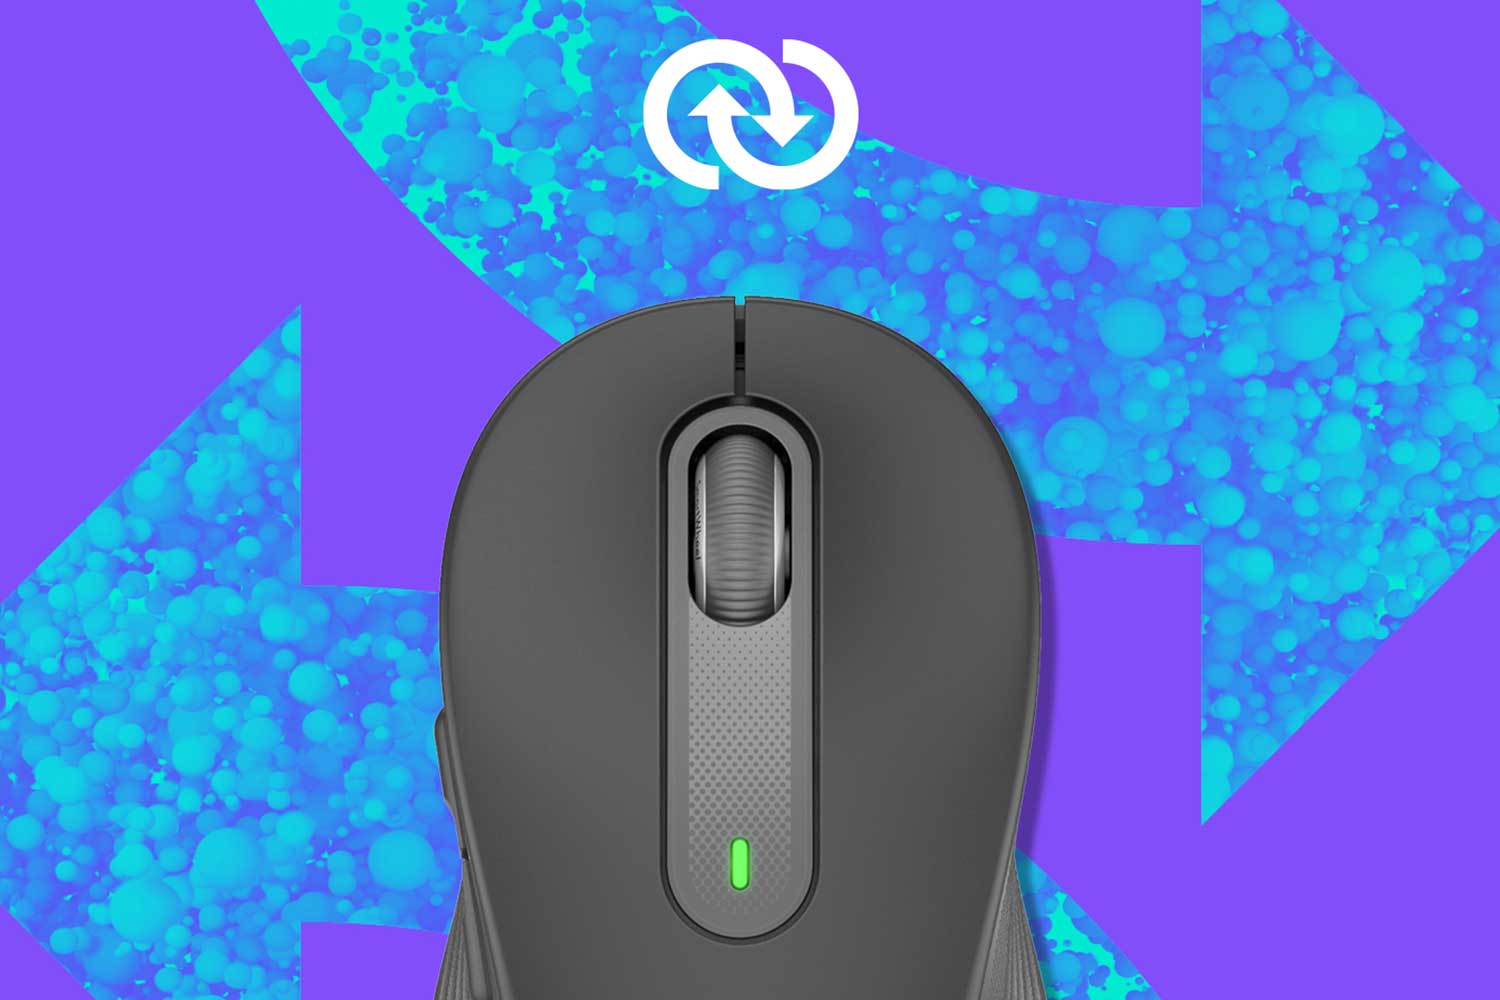 sustainability symbol with close up of Logitech M650 mouse